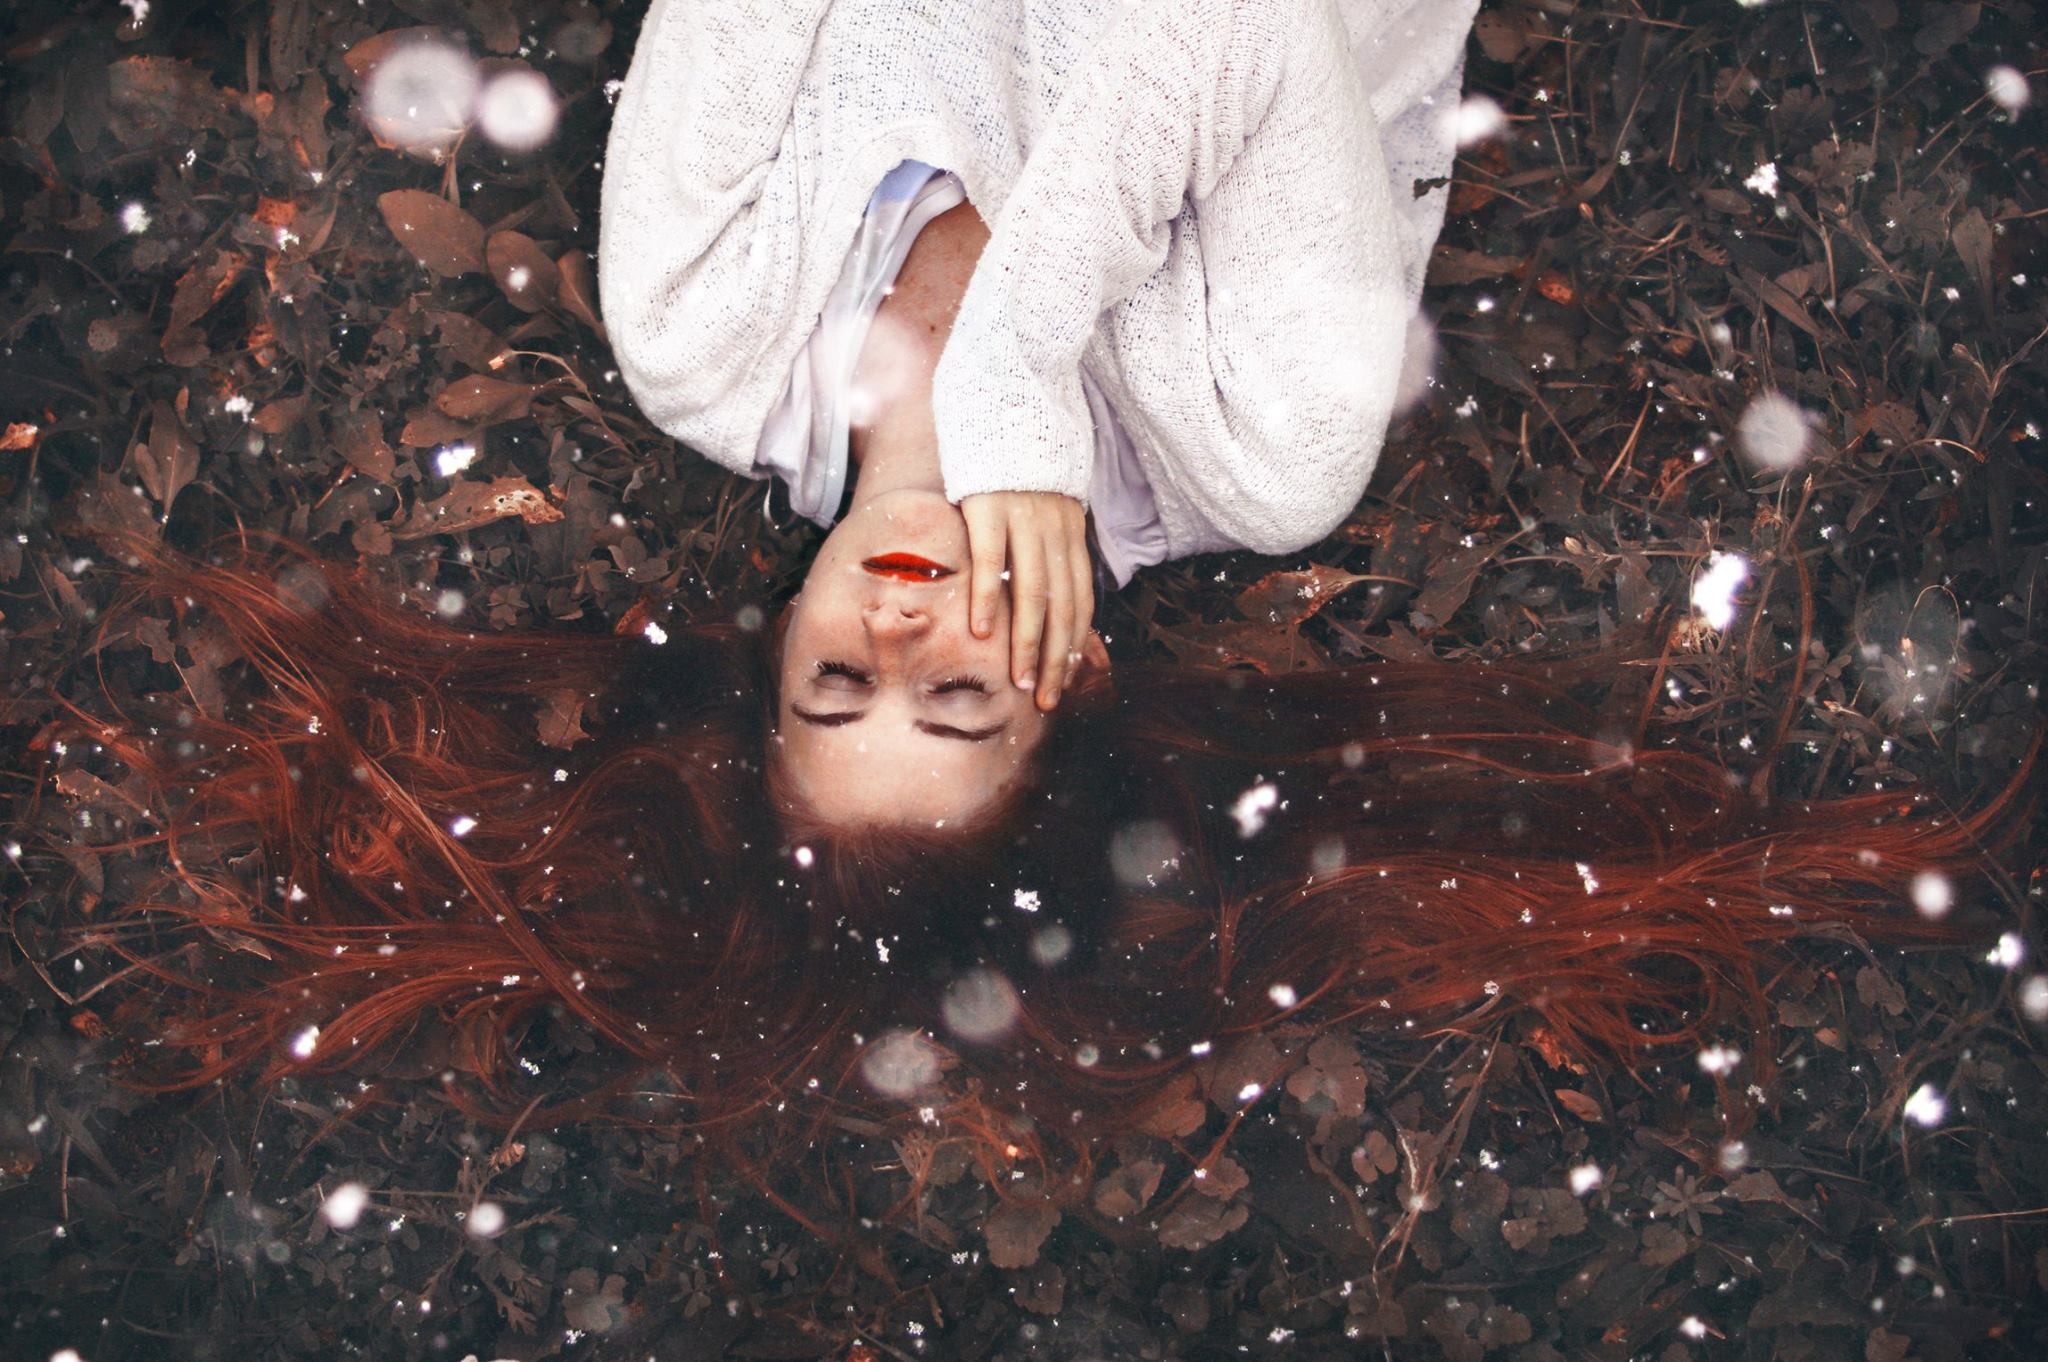 Women Redhead Red Lipstick Hand On Face Closed Eyes Snow Flakes 2048x1362